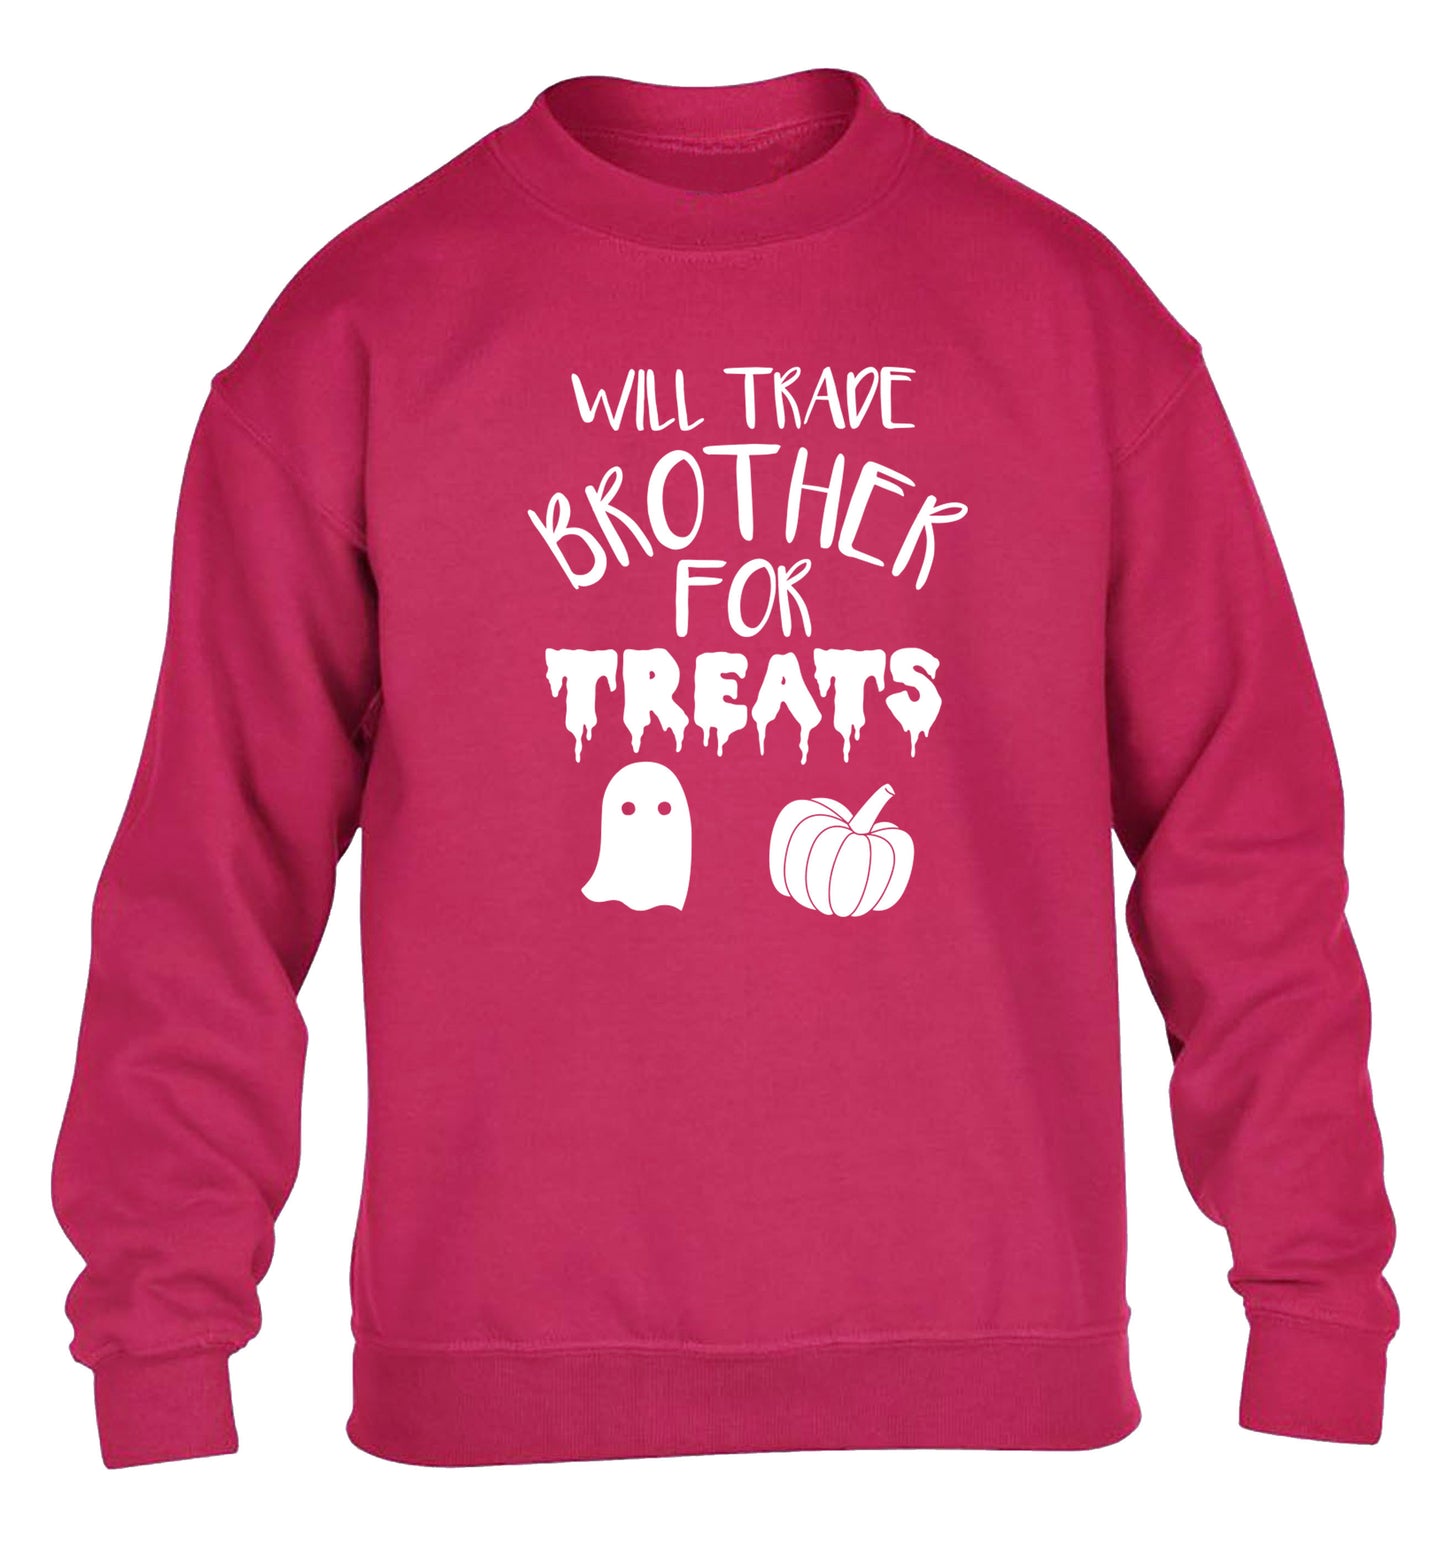 Will trade brother for treats children's pink sweater 12-14 Years